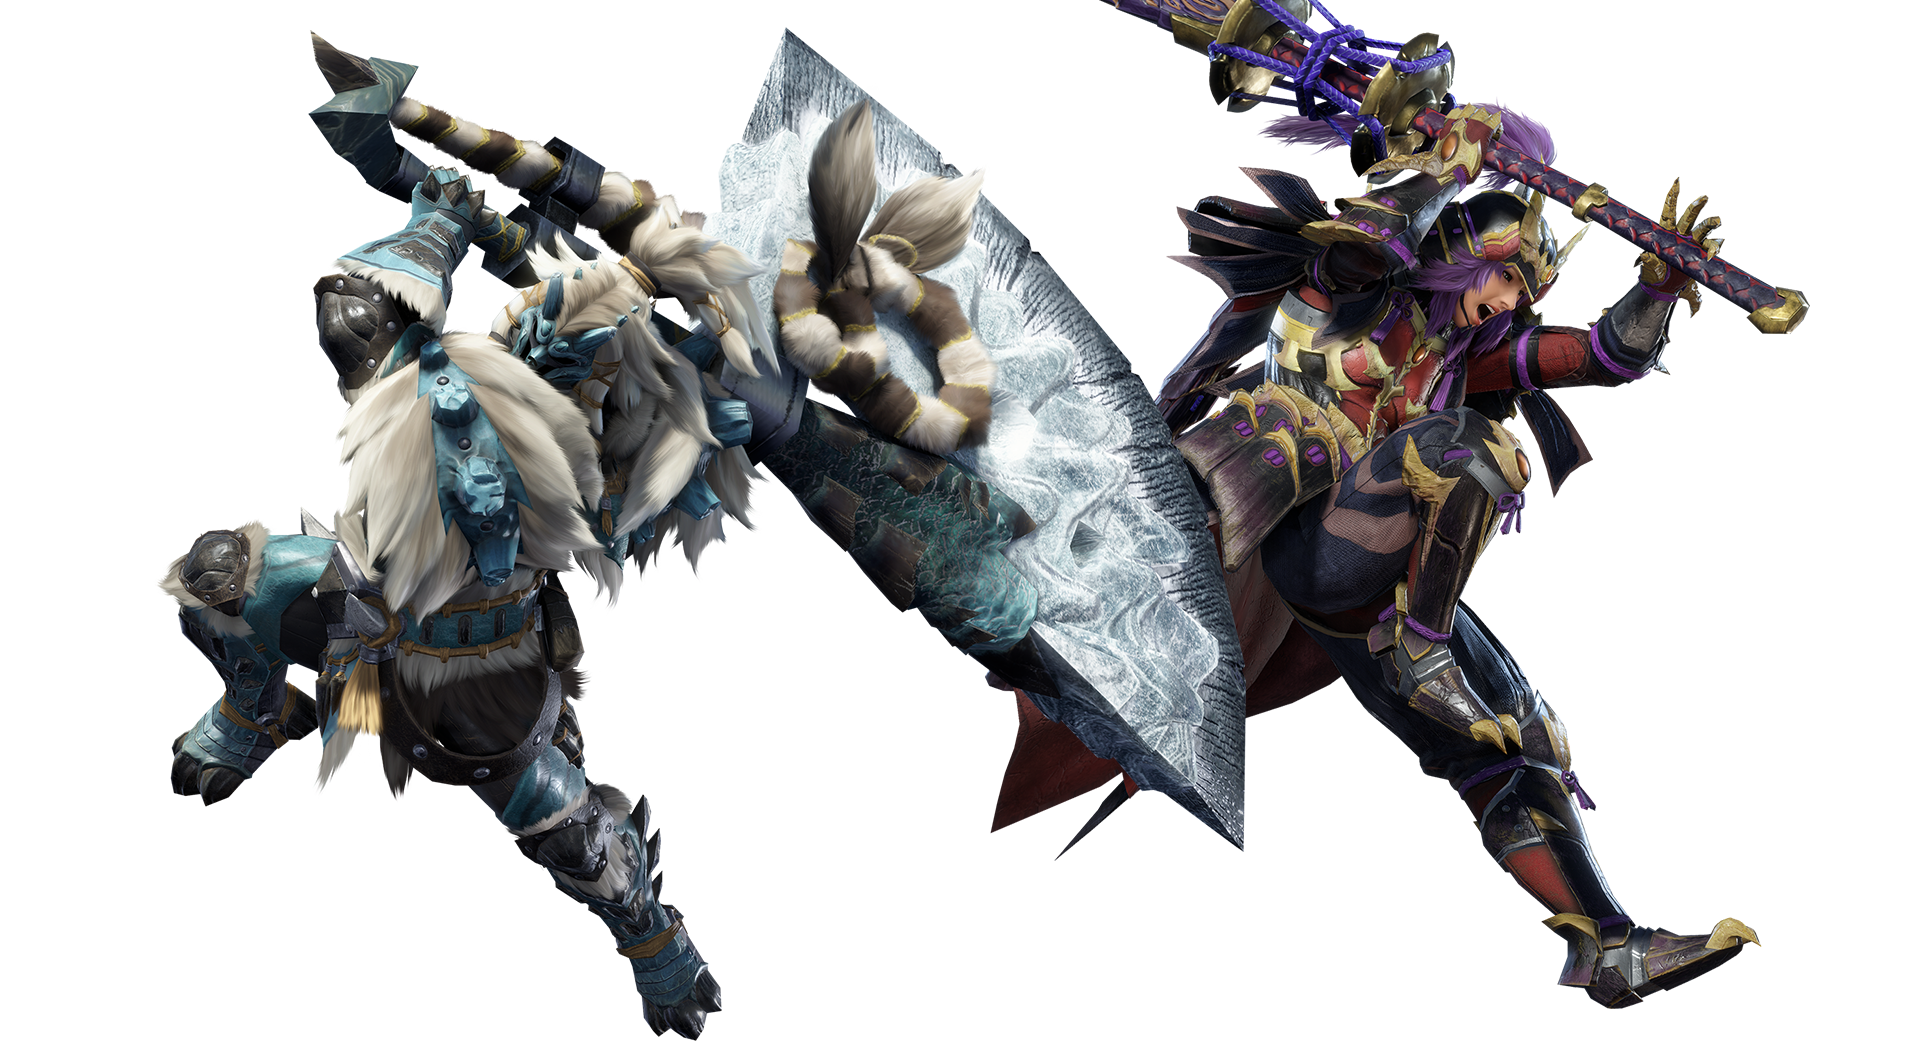 Monster Hunter Rise Weapon and Armor Guide